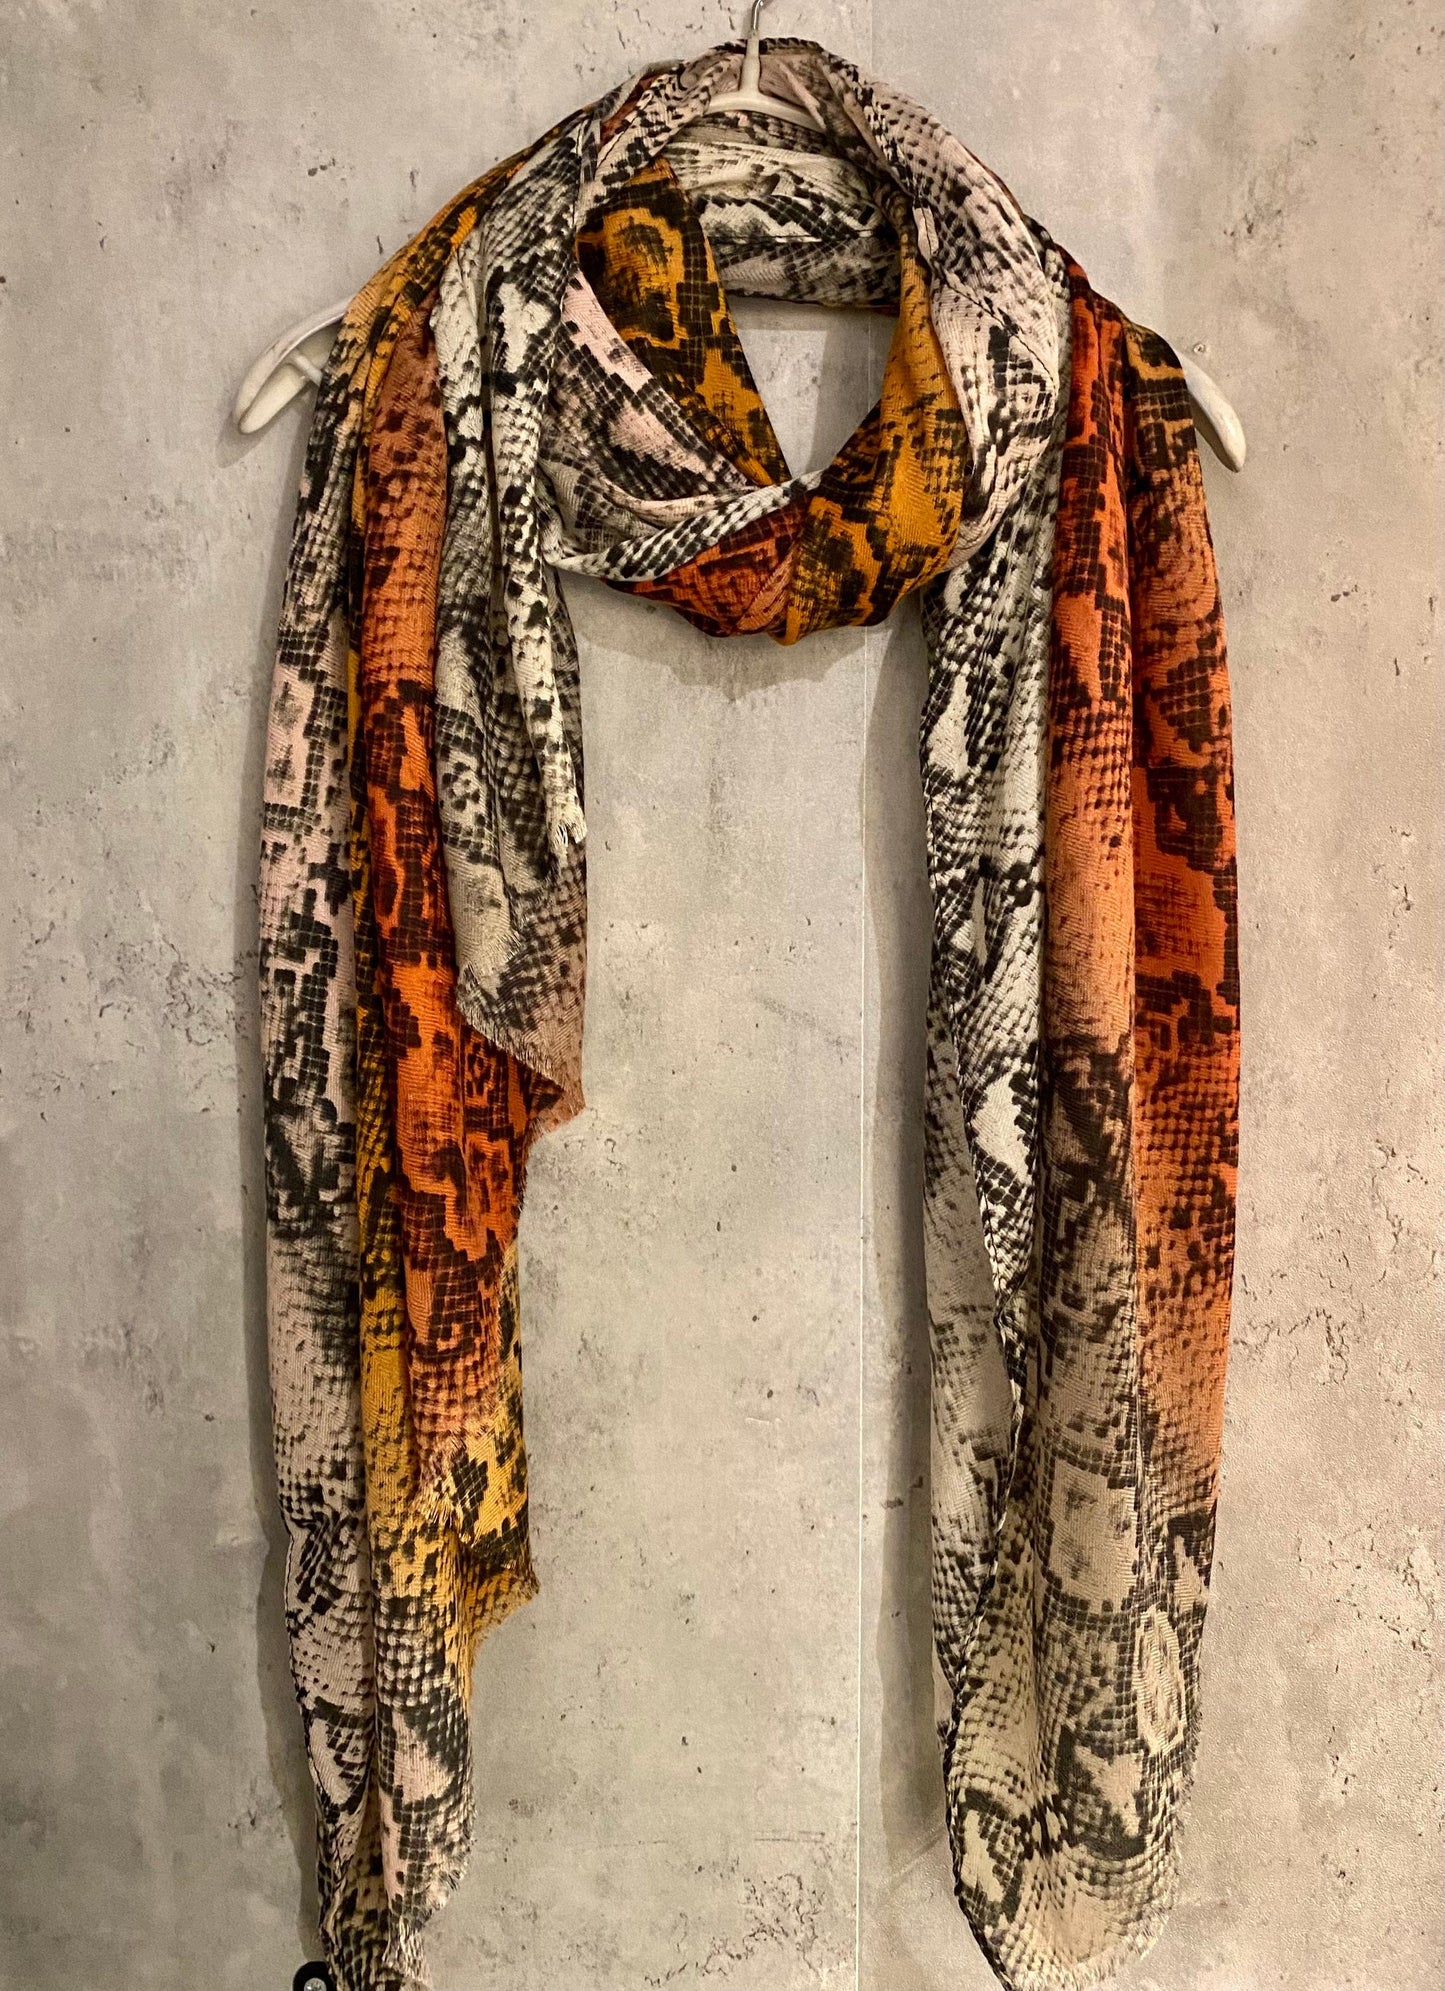 Two Toned Python Pattern Orange Beige Cotton Scarf/Autumn Winter Scarf/Gifts For Mom/Gifts For Her Birthday Christmas/Scarf Women/UK Seller